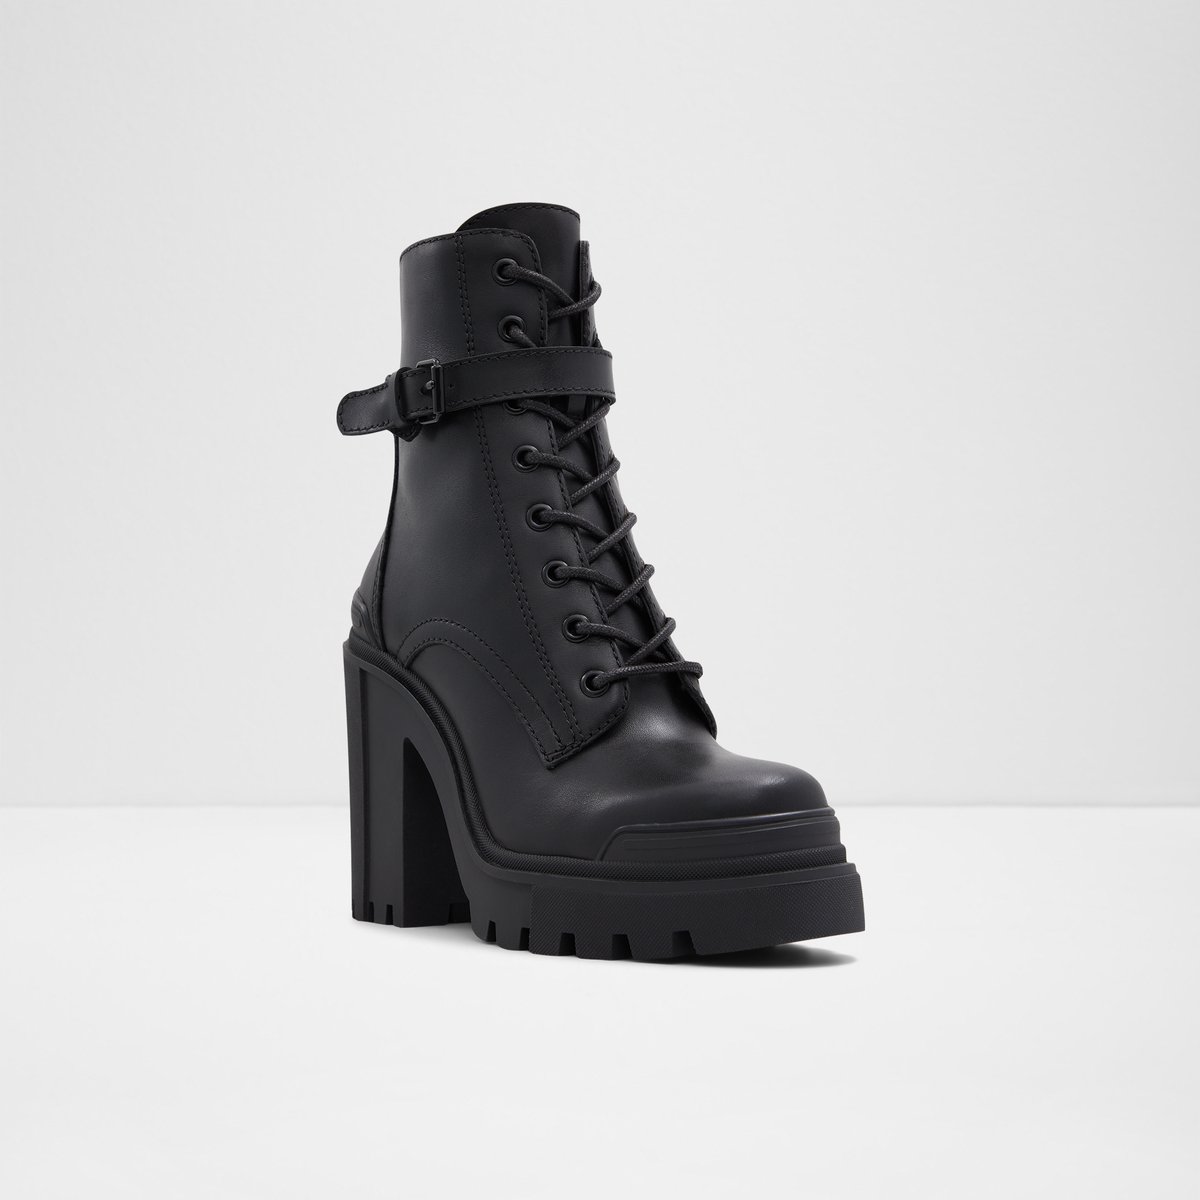 Uplift Black Leather Smooth Women's Casual Boots | ALDO US